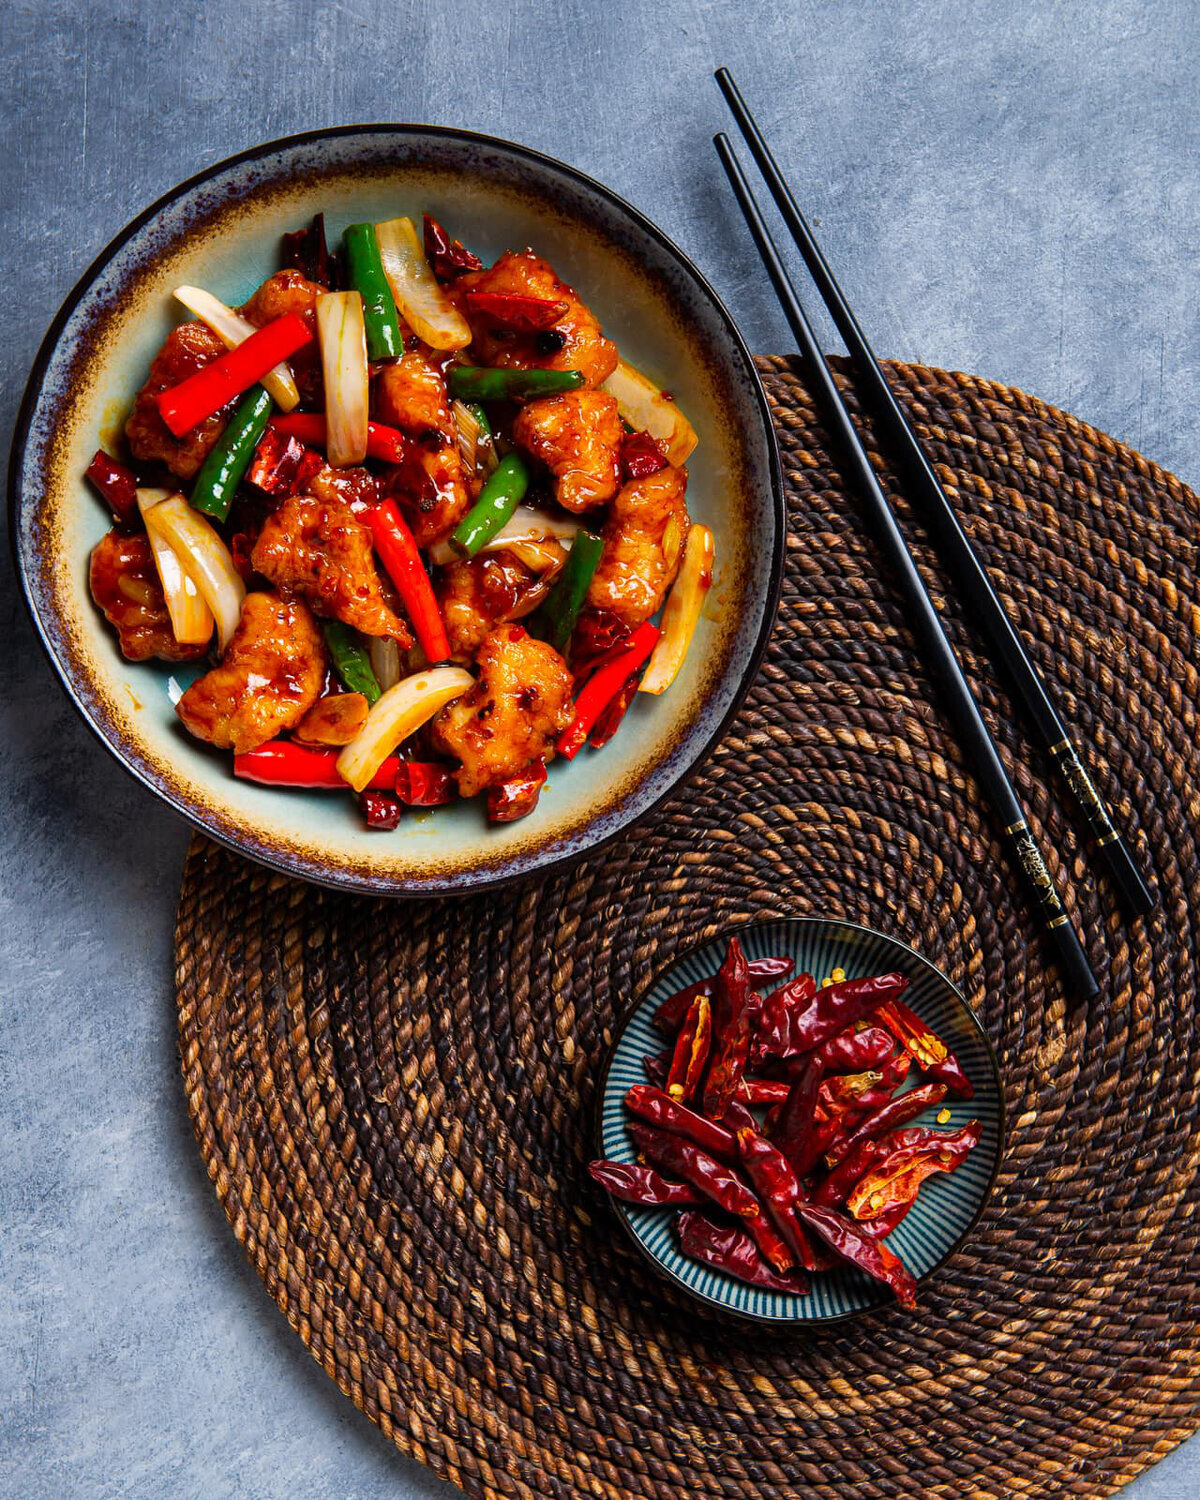 41.-Wok-Fried-Grouper-Fillet-with-Spicy-Sichuan-Sauce